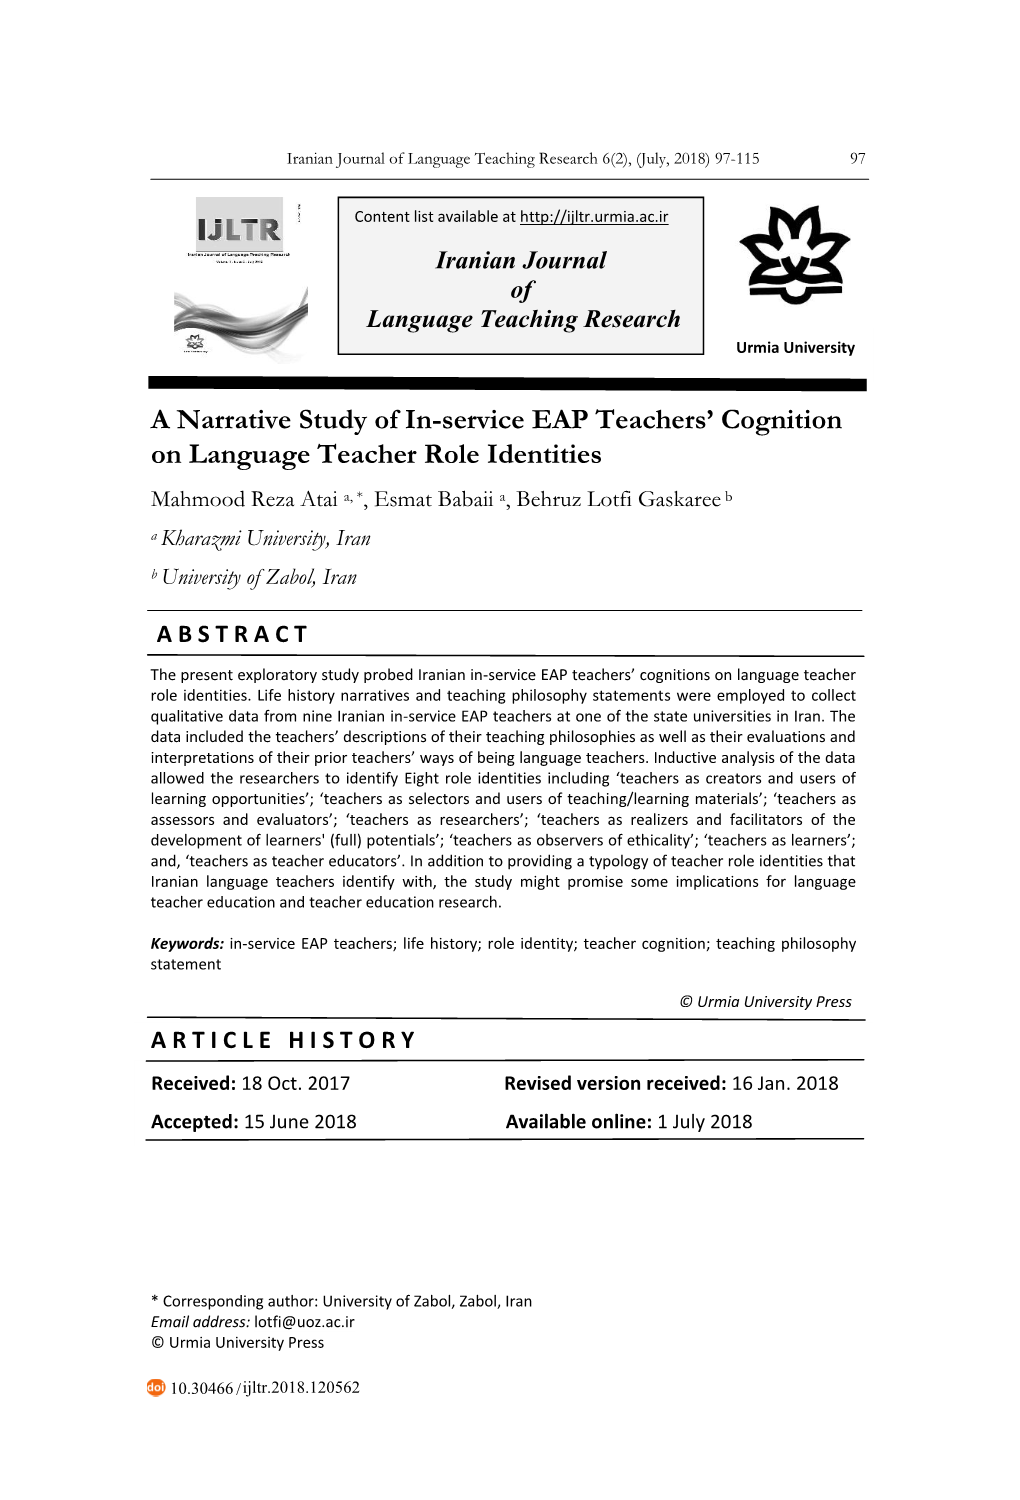 A Narrative Study of In-Service EAP Teachers' Cognition on Language